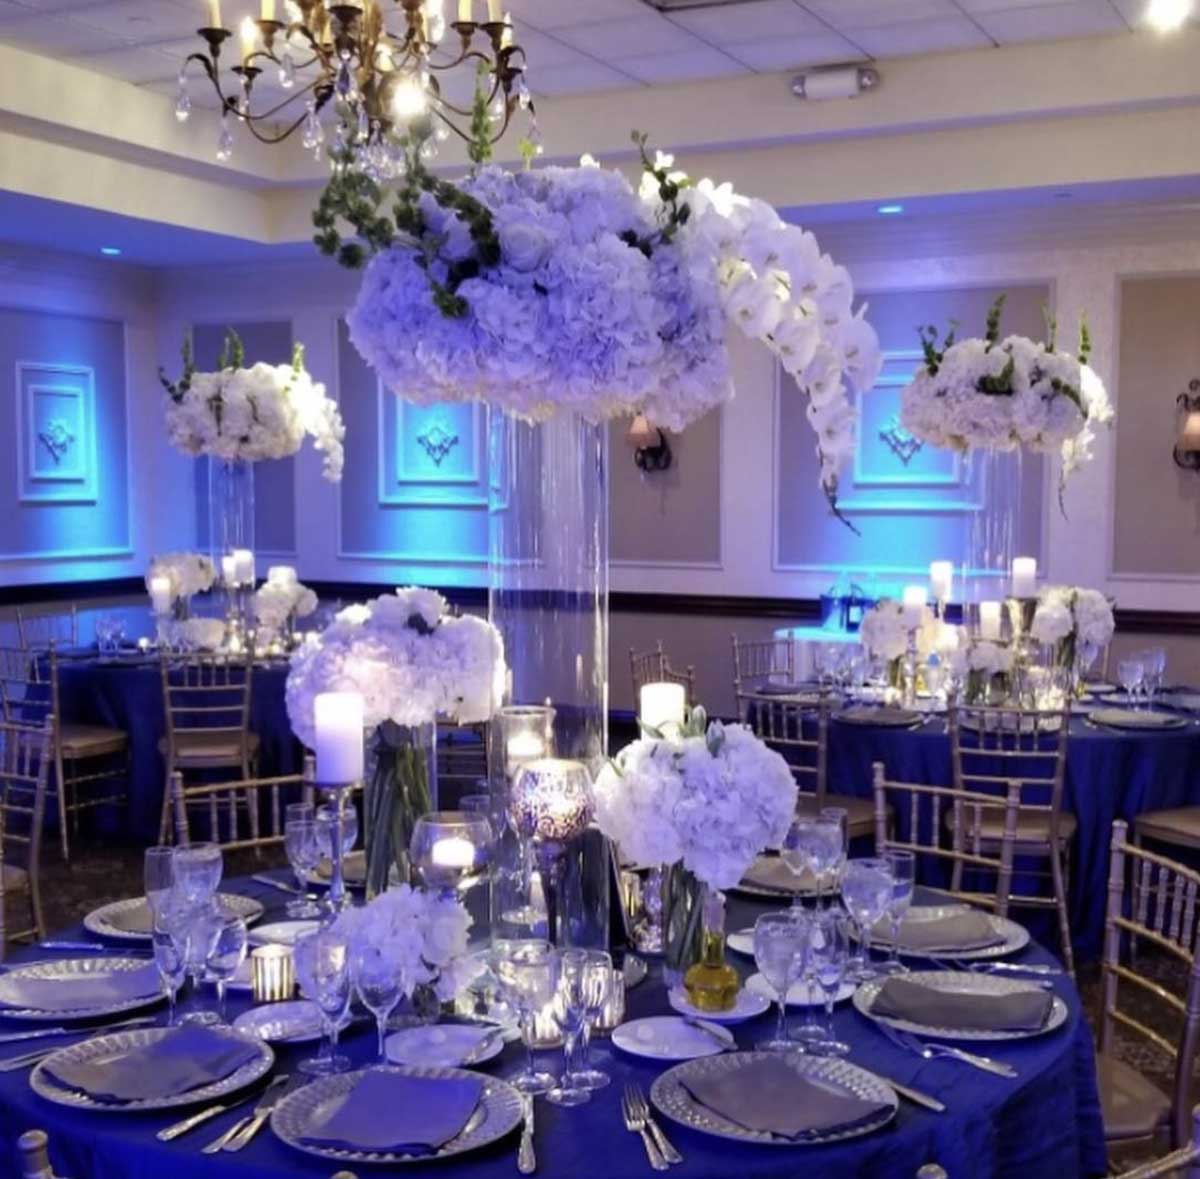 An enchanting blue and white wedding reception adorned with elegant centerpieces at one of the breathtaking outdoor wedding venues in NJ.